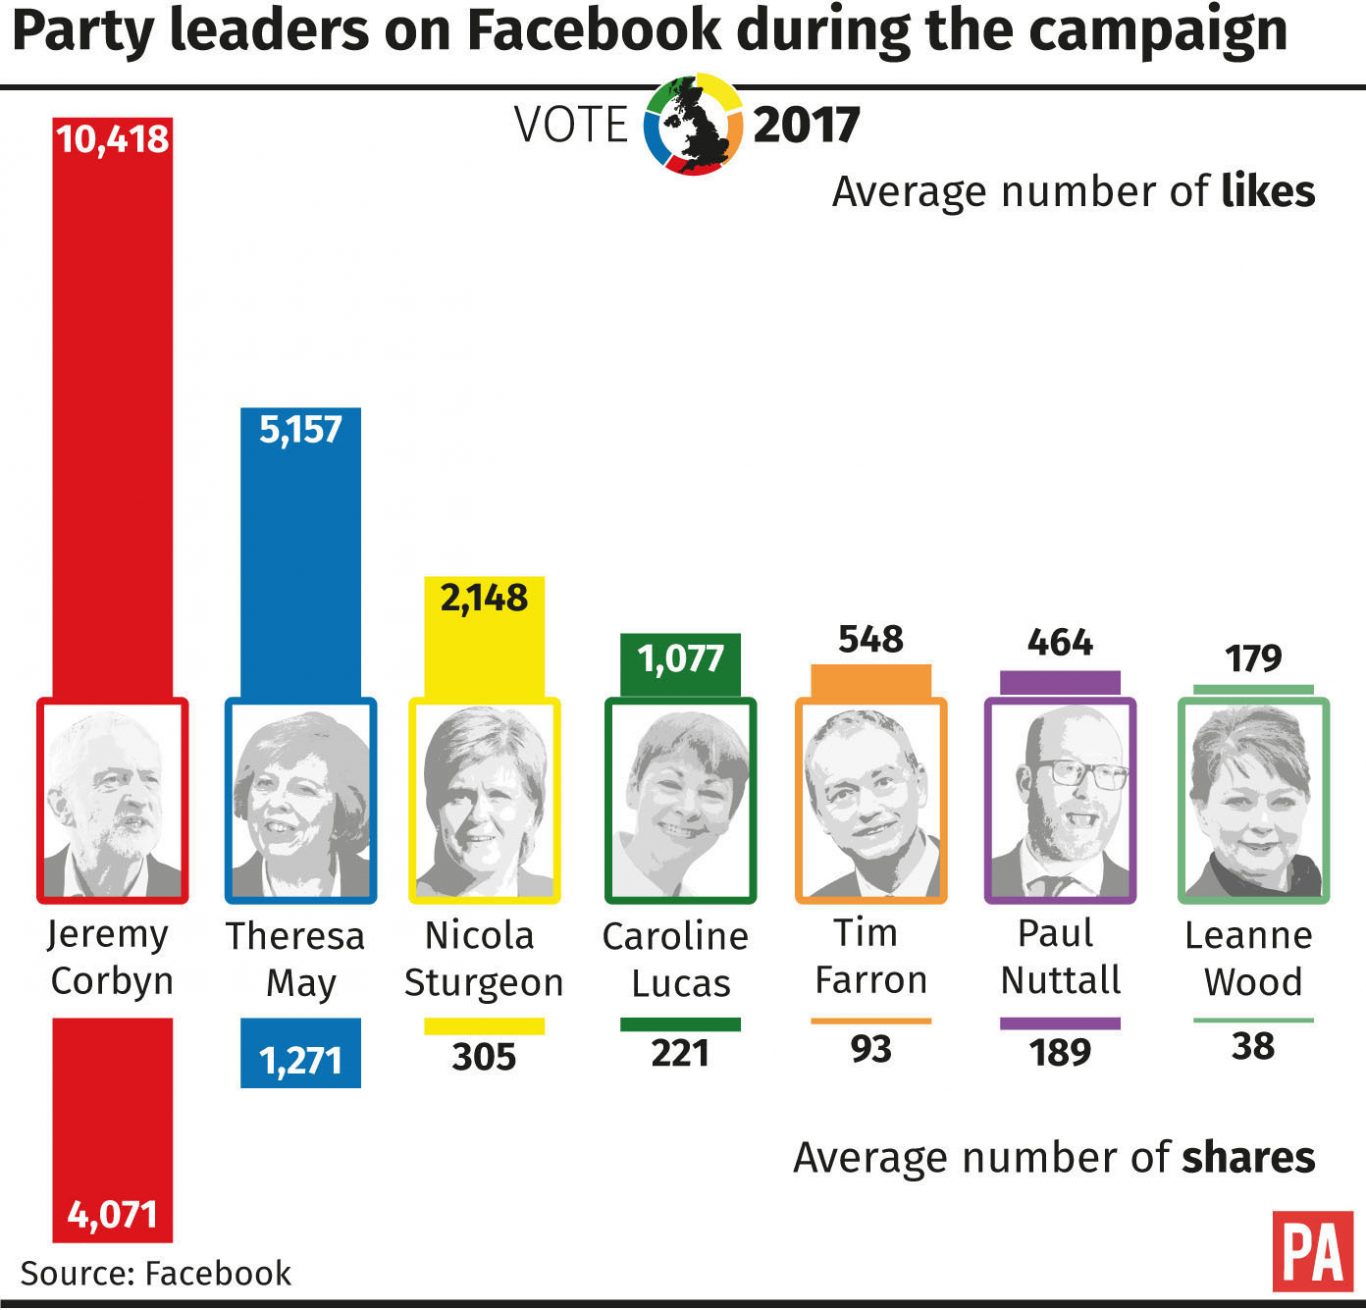 Party leaders on Facebook during the campaign